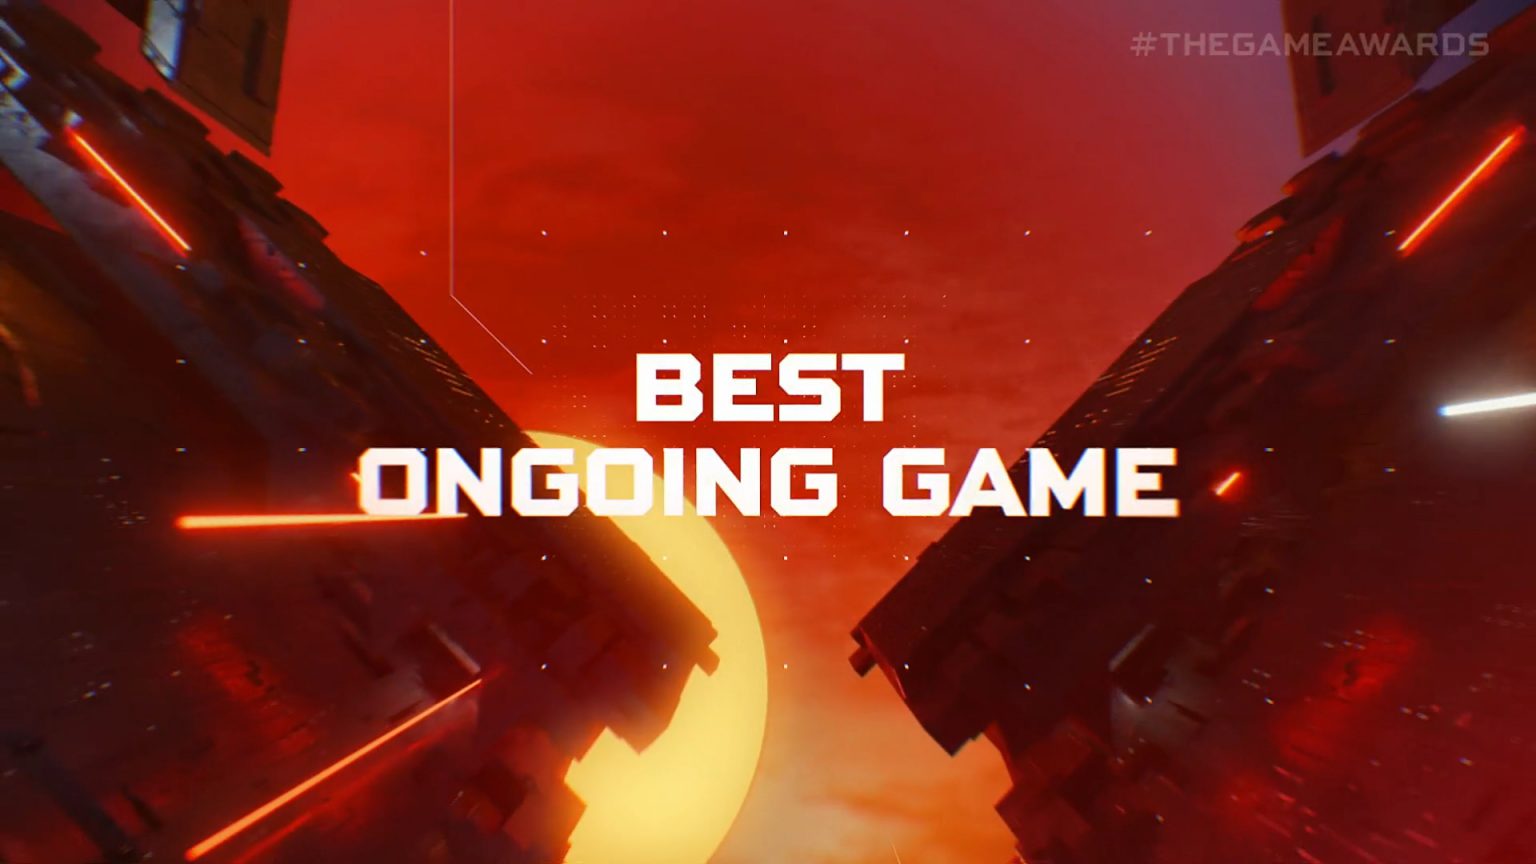 No Man's Sky wins "Best Ongoing Game" at the TGAs 2020 Hello Games